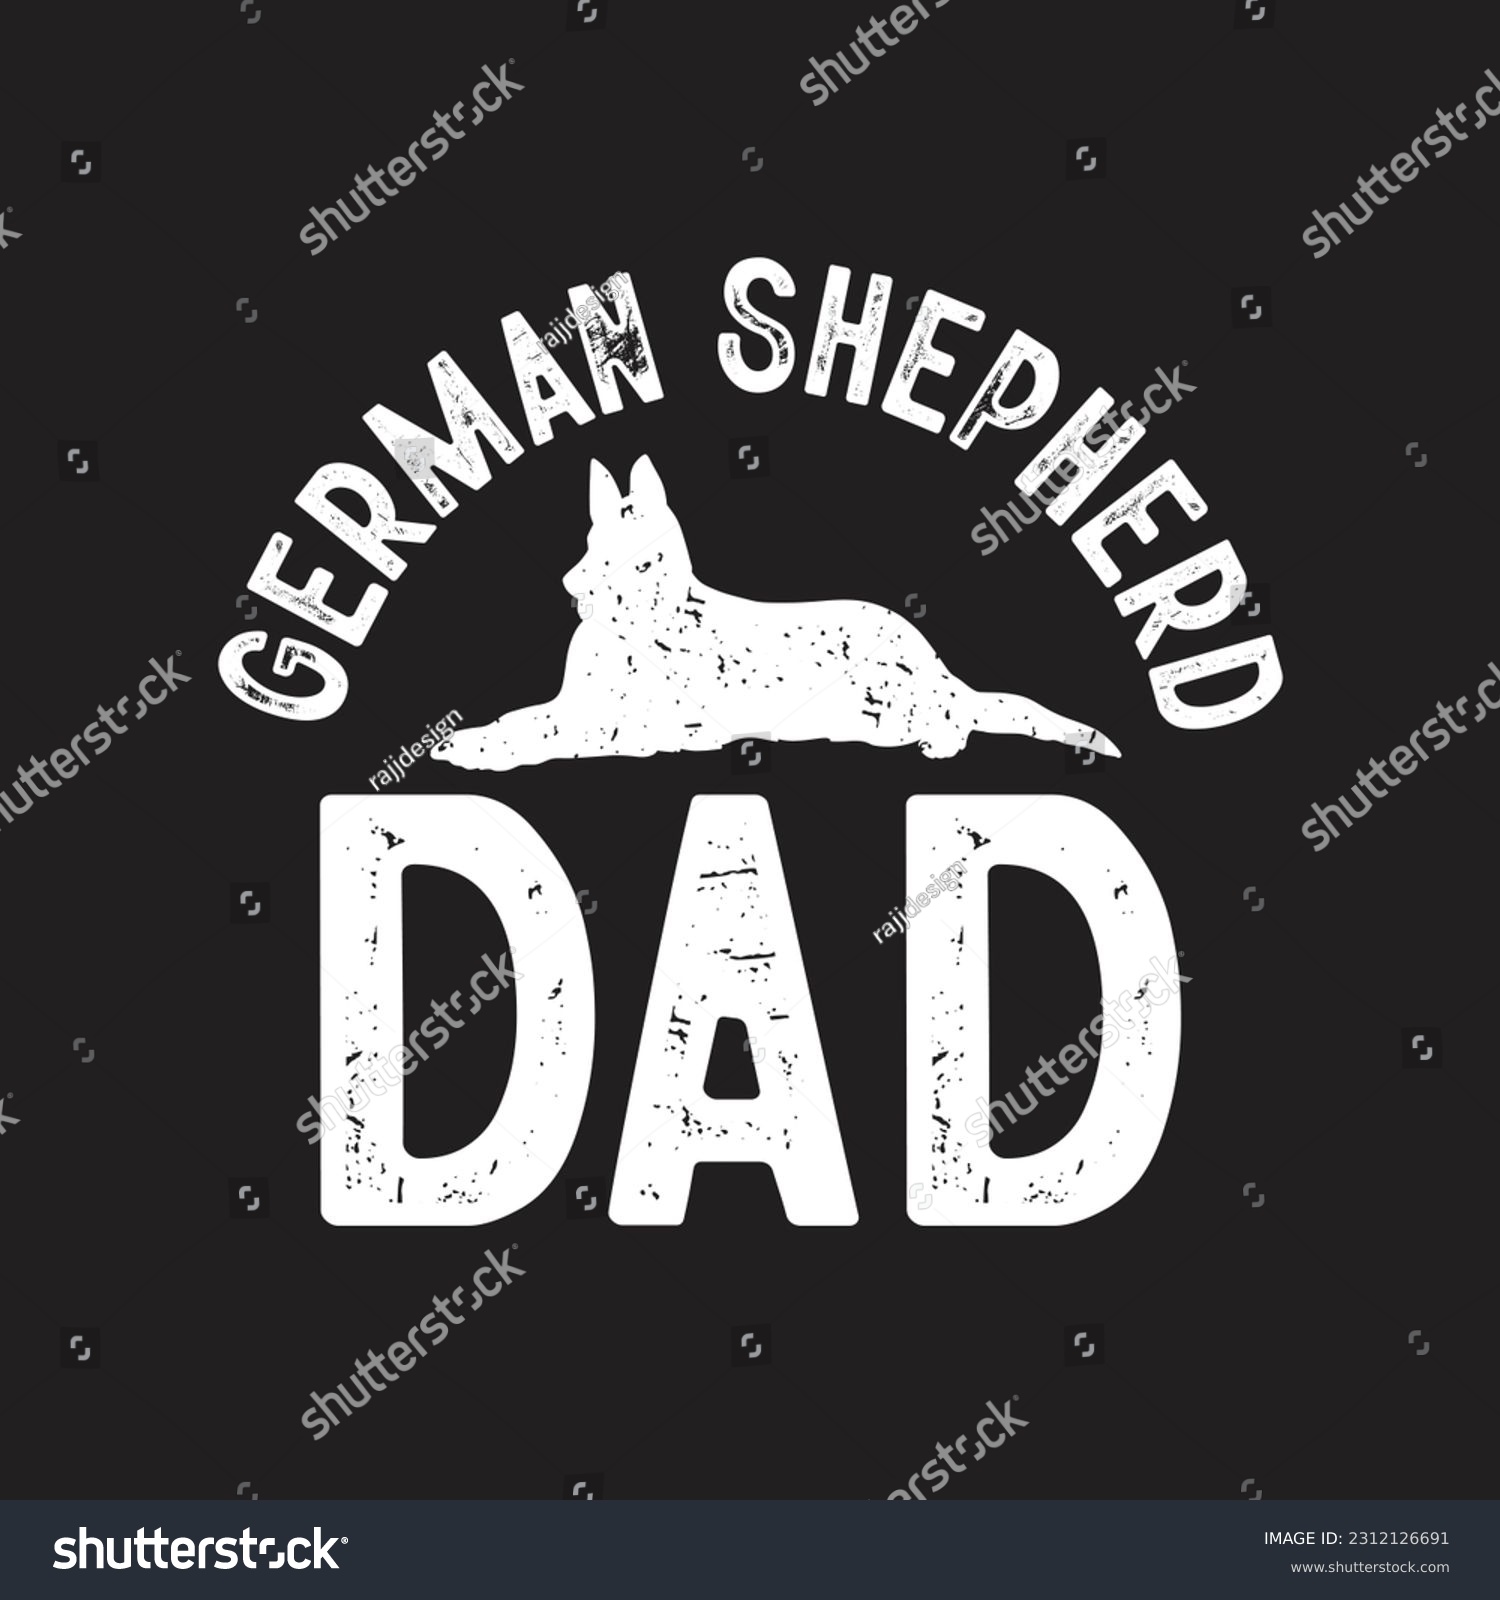 SVG of German Shepherd Dad  T-Shirt Design, Posters, Greeting Cards, Textiles, and Sticker Vector Illustration svg